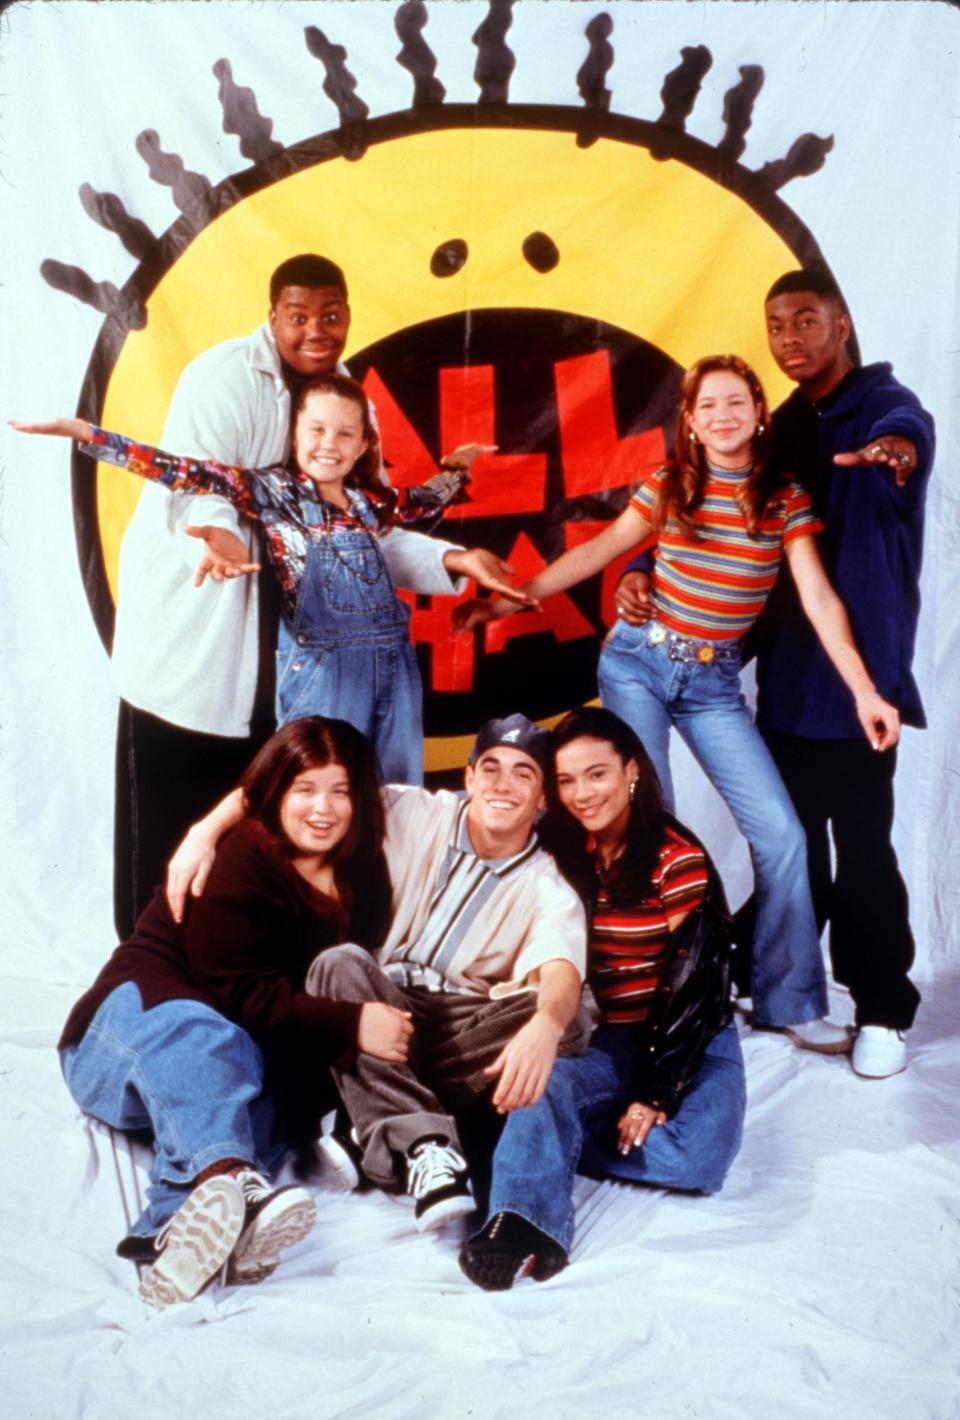 The cast of "All That" on Nickelodeon: Lori Beth Denberg, Josh Server, Alisa Reyes, (l-r back row) Kenan Thompson, Amanda Bynes, Katrina Johnson and Kel Mitchell. Johnson was among the actors who spoke out in "Quiet on Set."